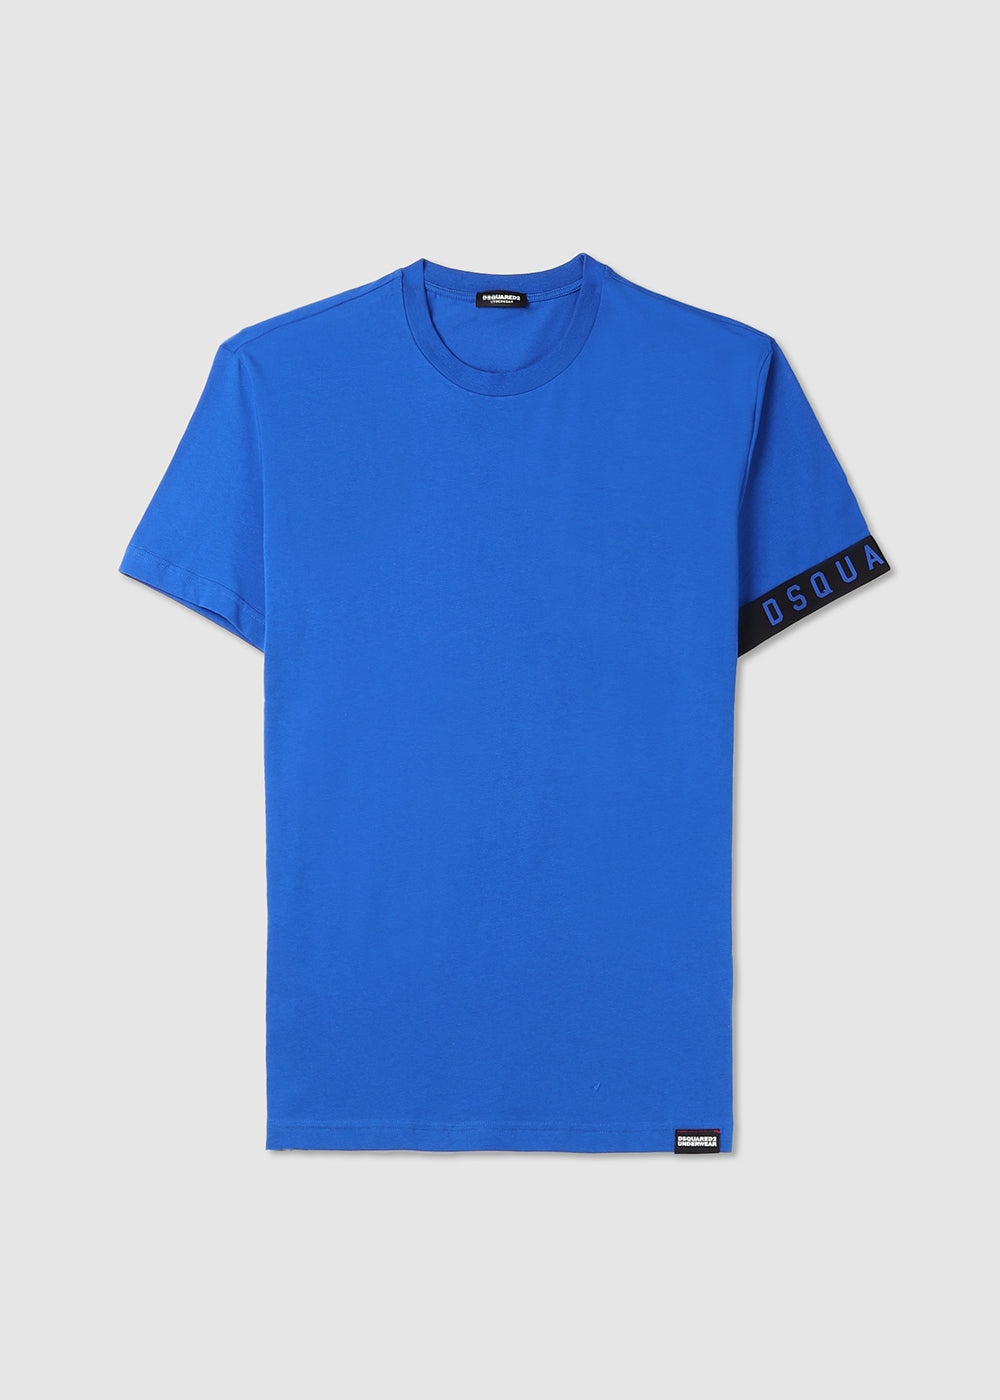 Image of Dsquared2 Mens T-Shirt In Blue